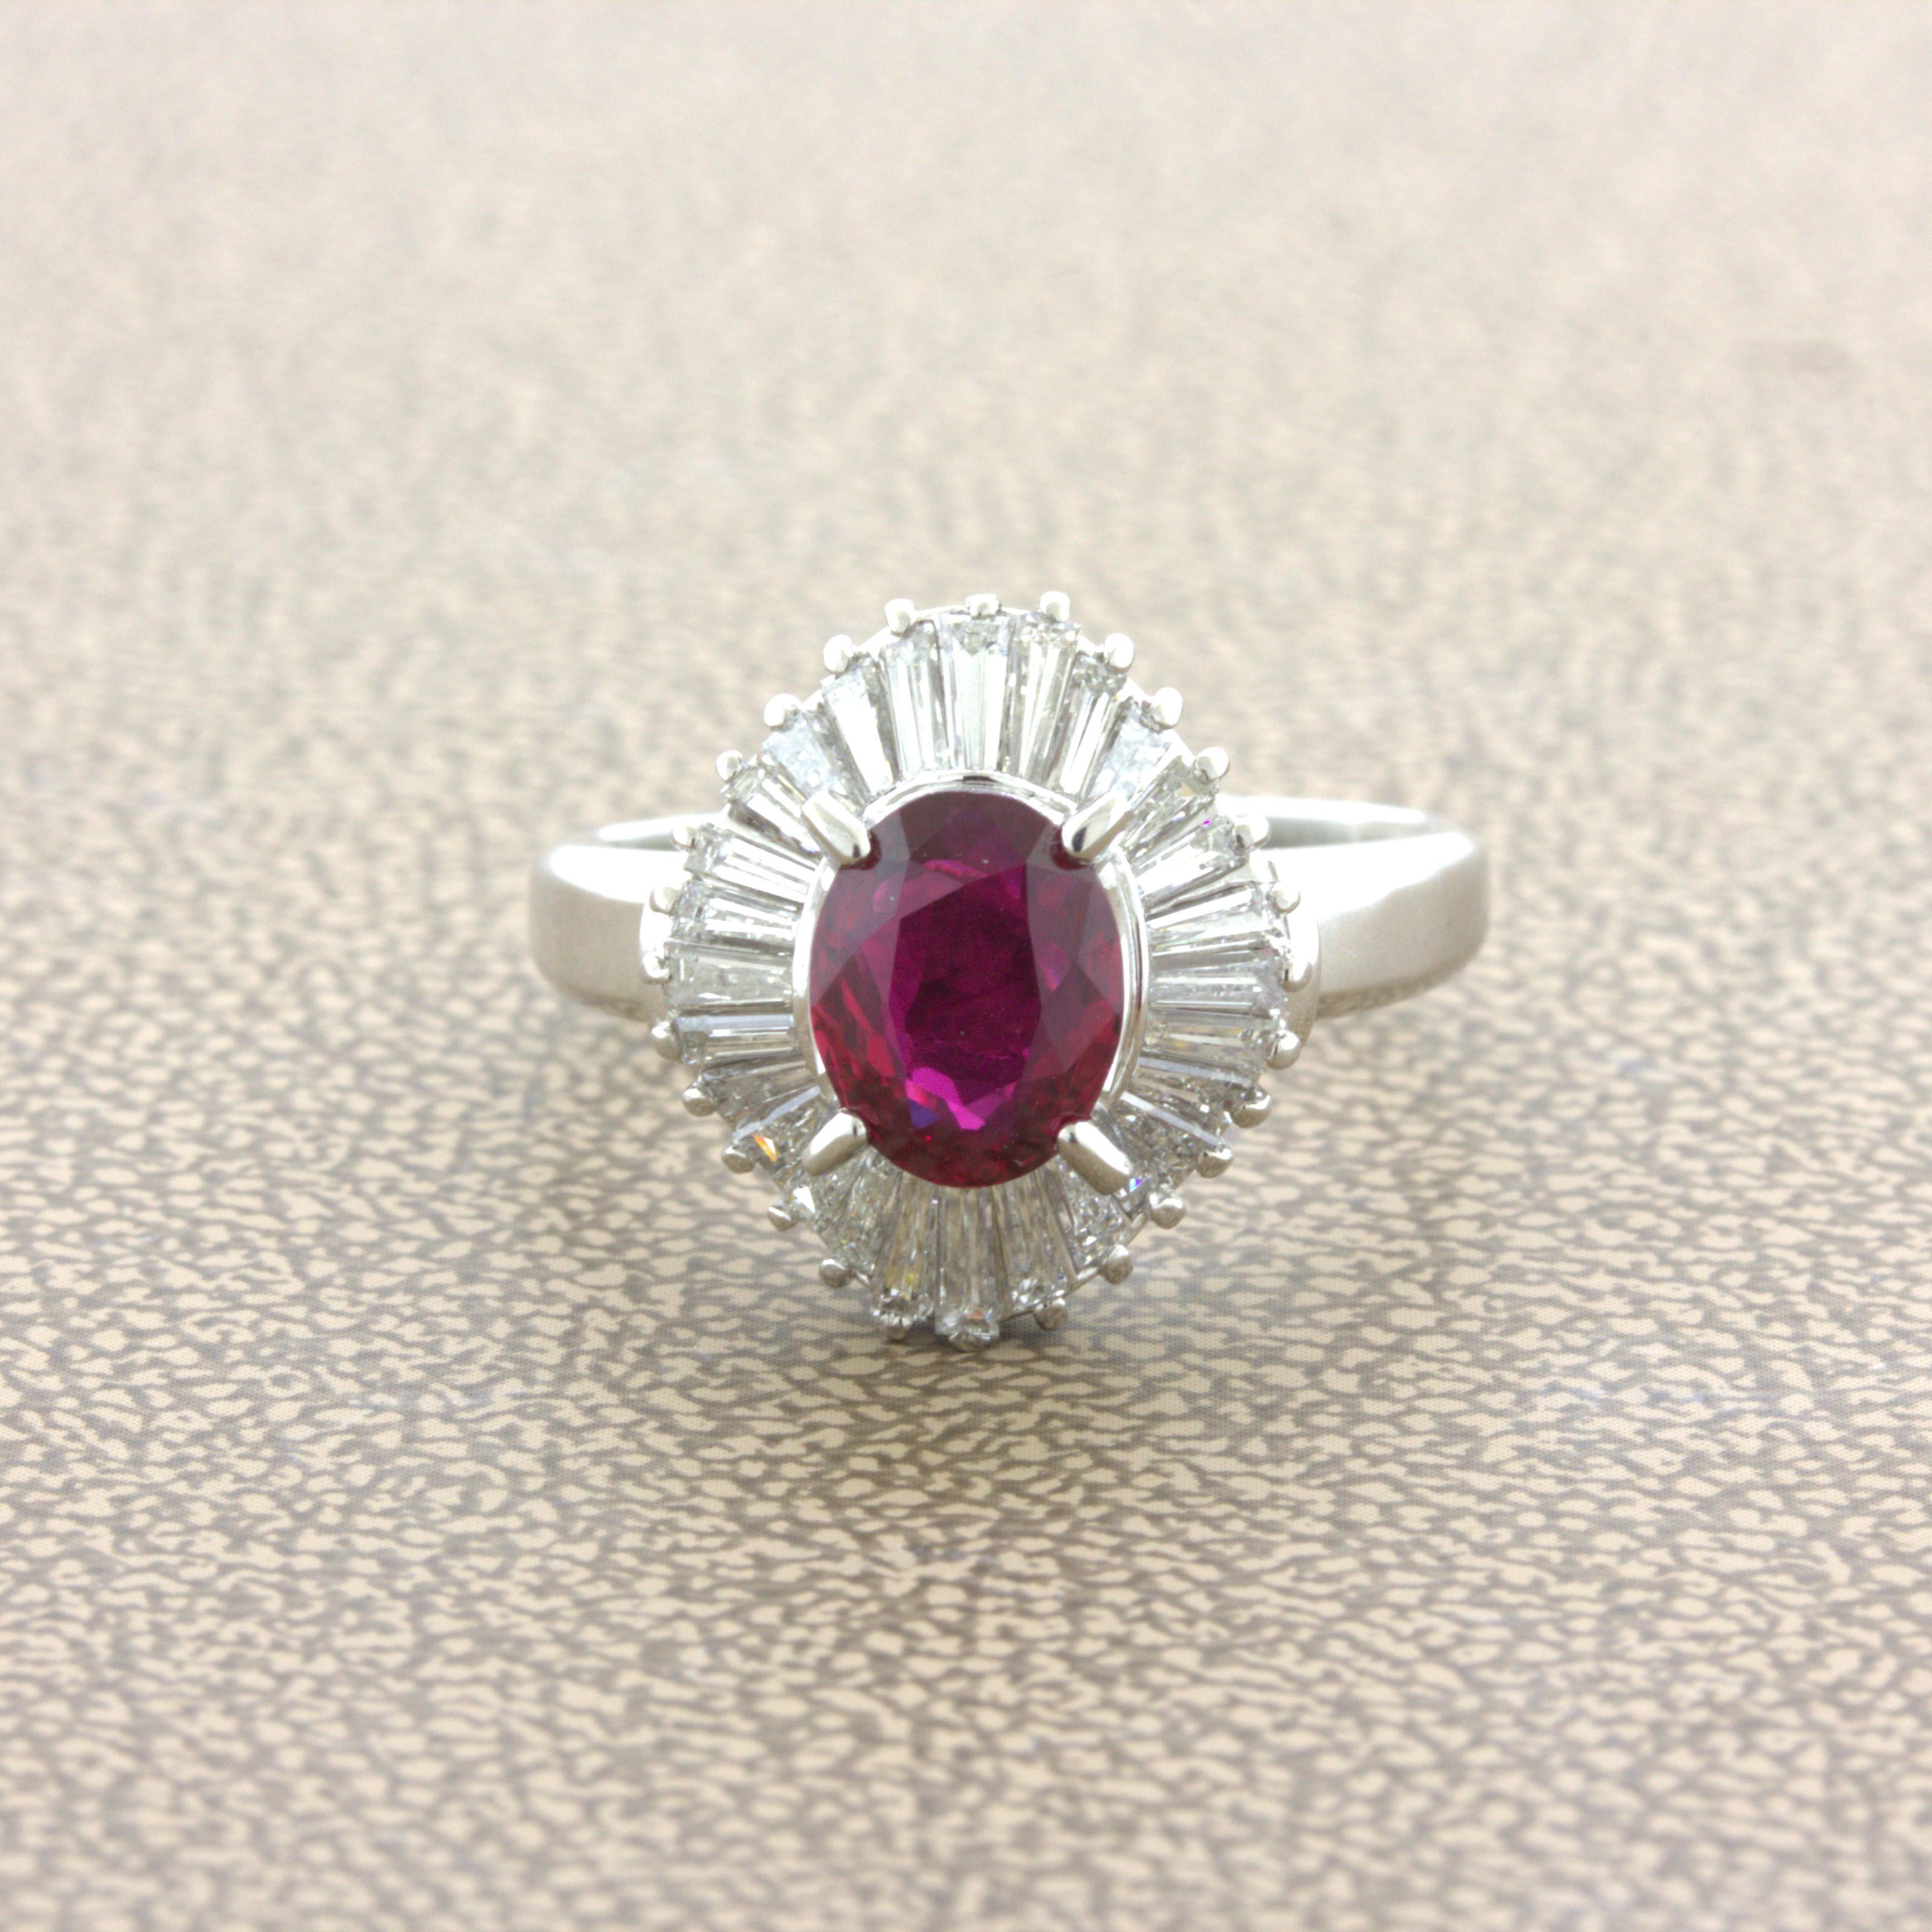 A rare and beautiful treasure of a gemstone. Rubies are the most difficult gemstone to find in fine qualities compared to emerald and sapphire. This ruby, weighing 1.32 carats, is as close to perfect as you can find. It has an intense vivid red